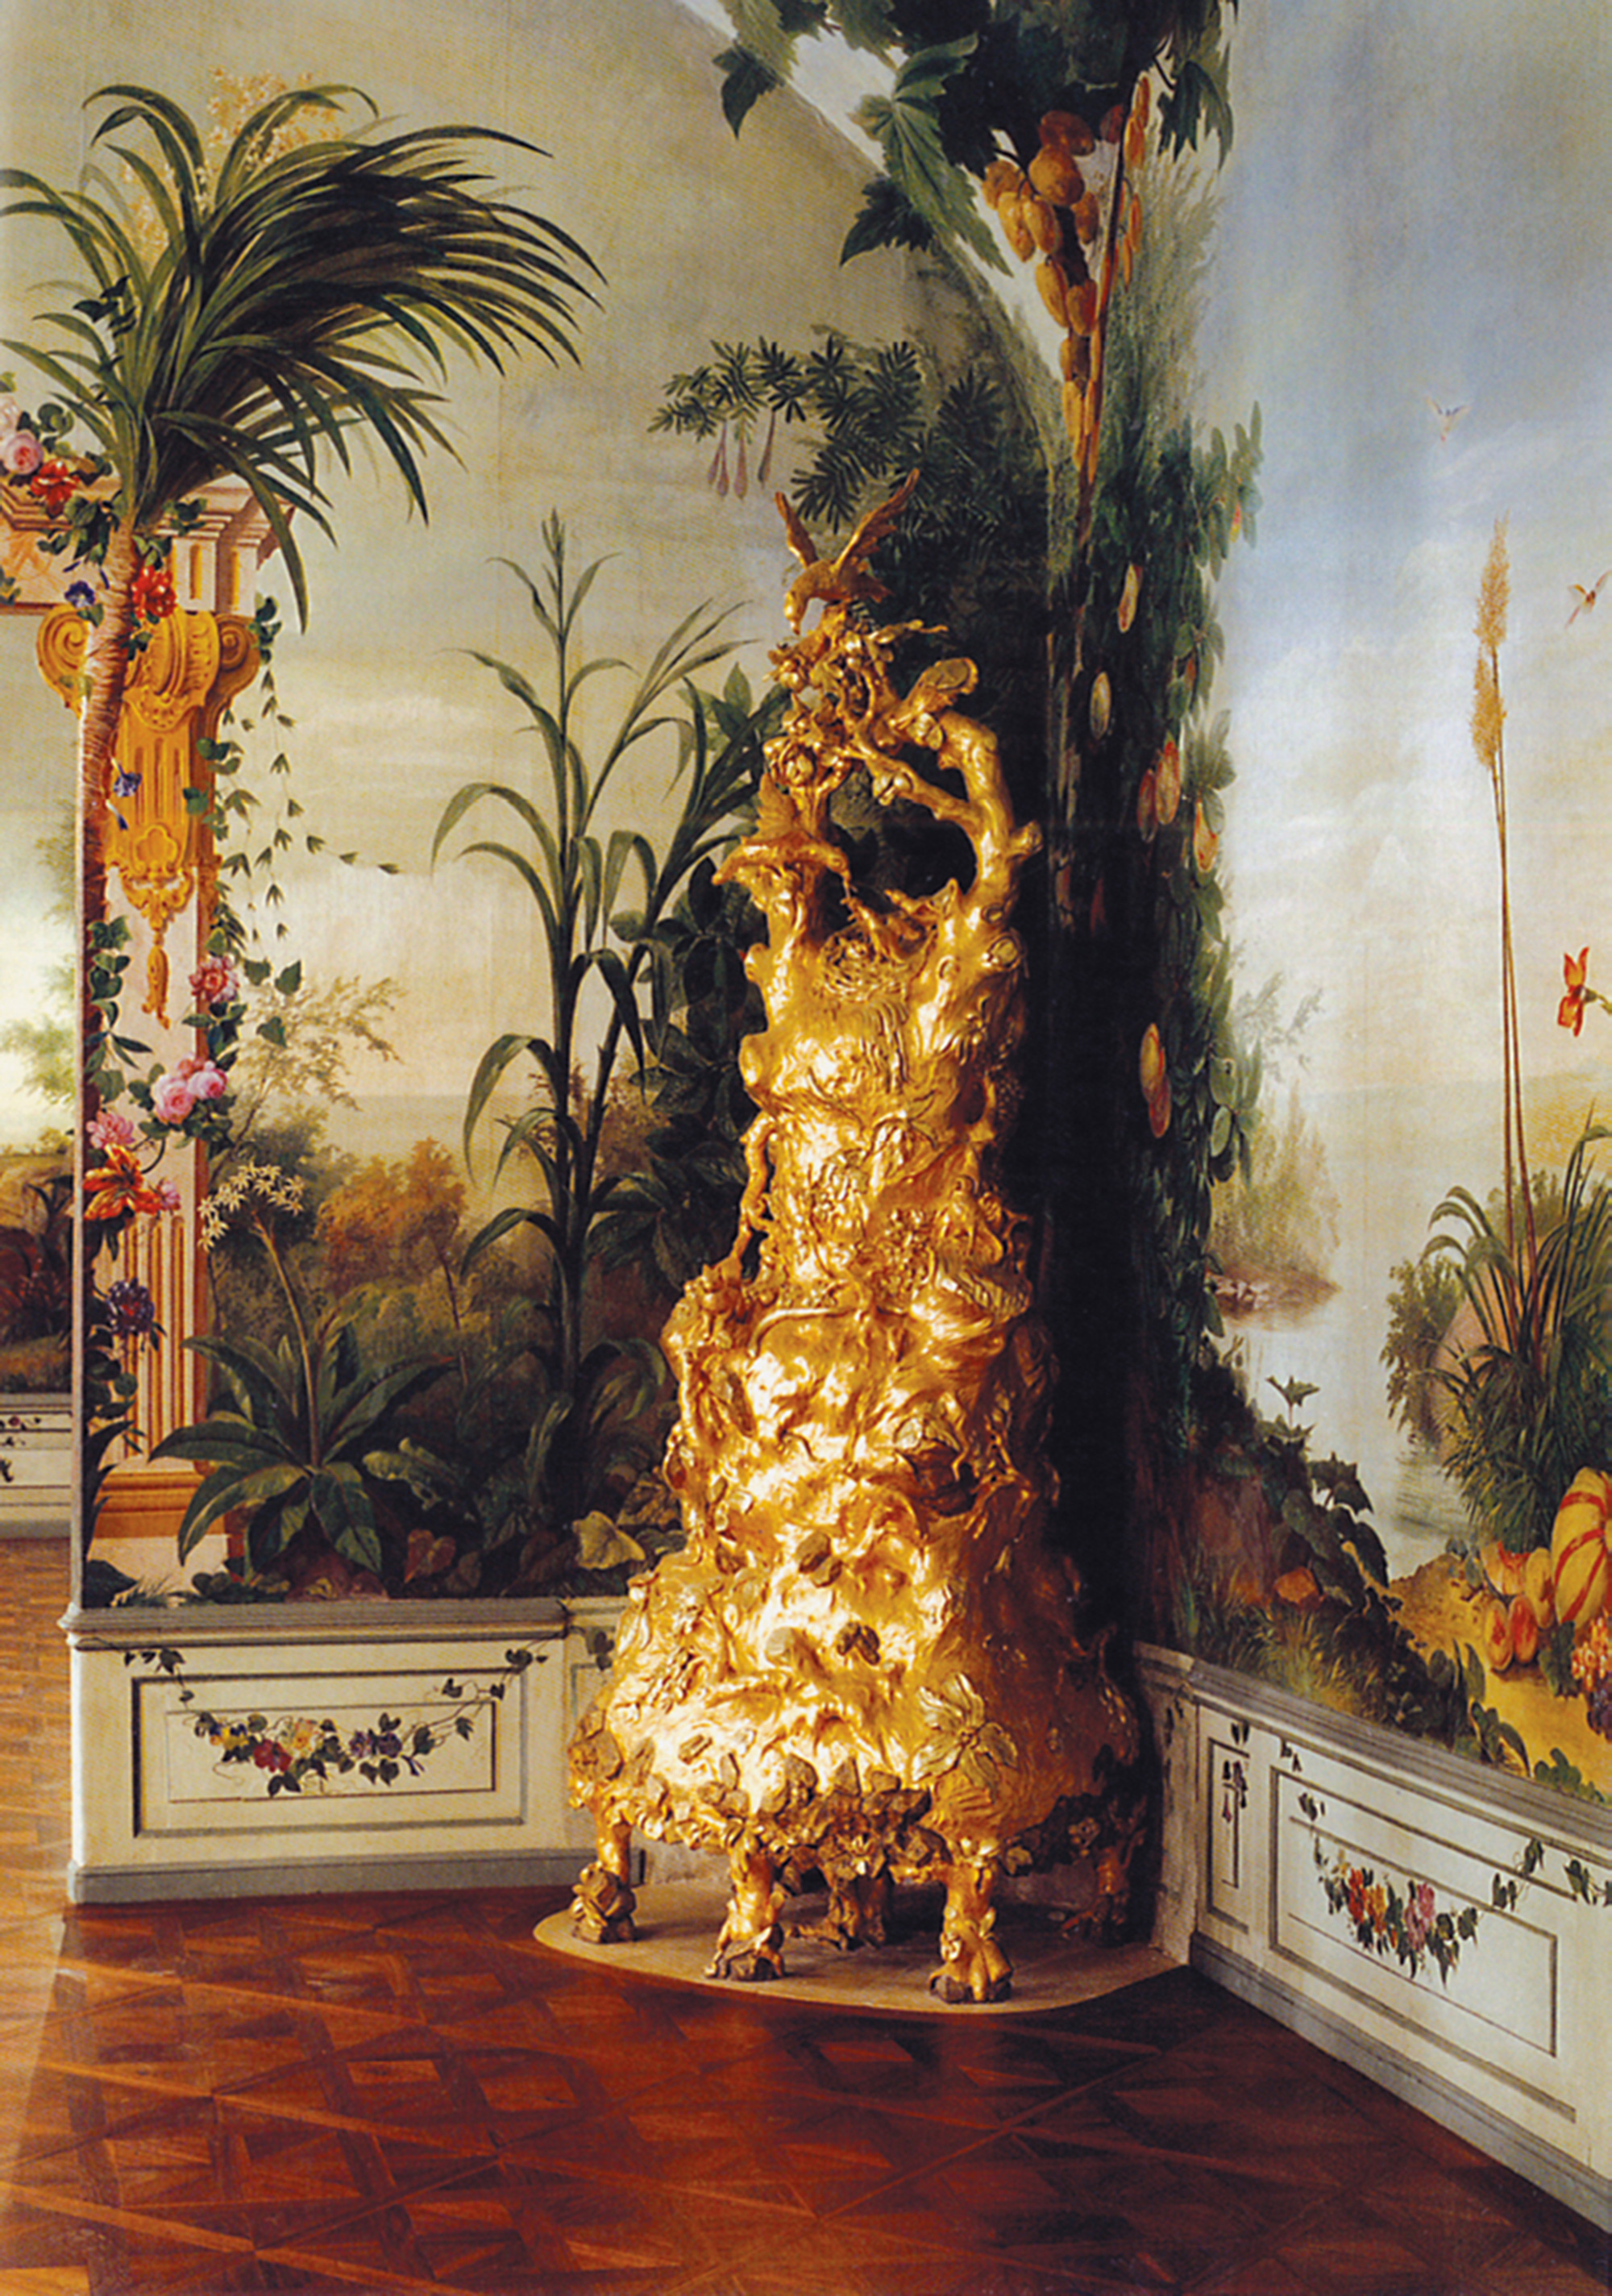 A photograph of a gilded faience stove in the shape of a tree, designed in seventeen sixty-nine by Johann Wenzel Bergl for Schönbrunn Palace, Vienna.